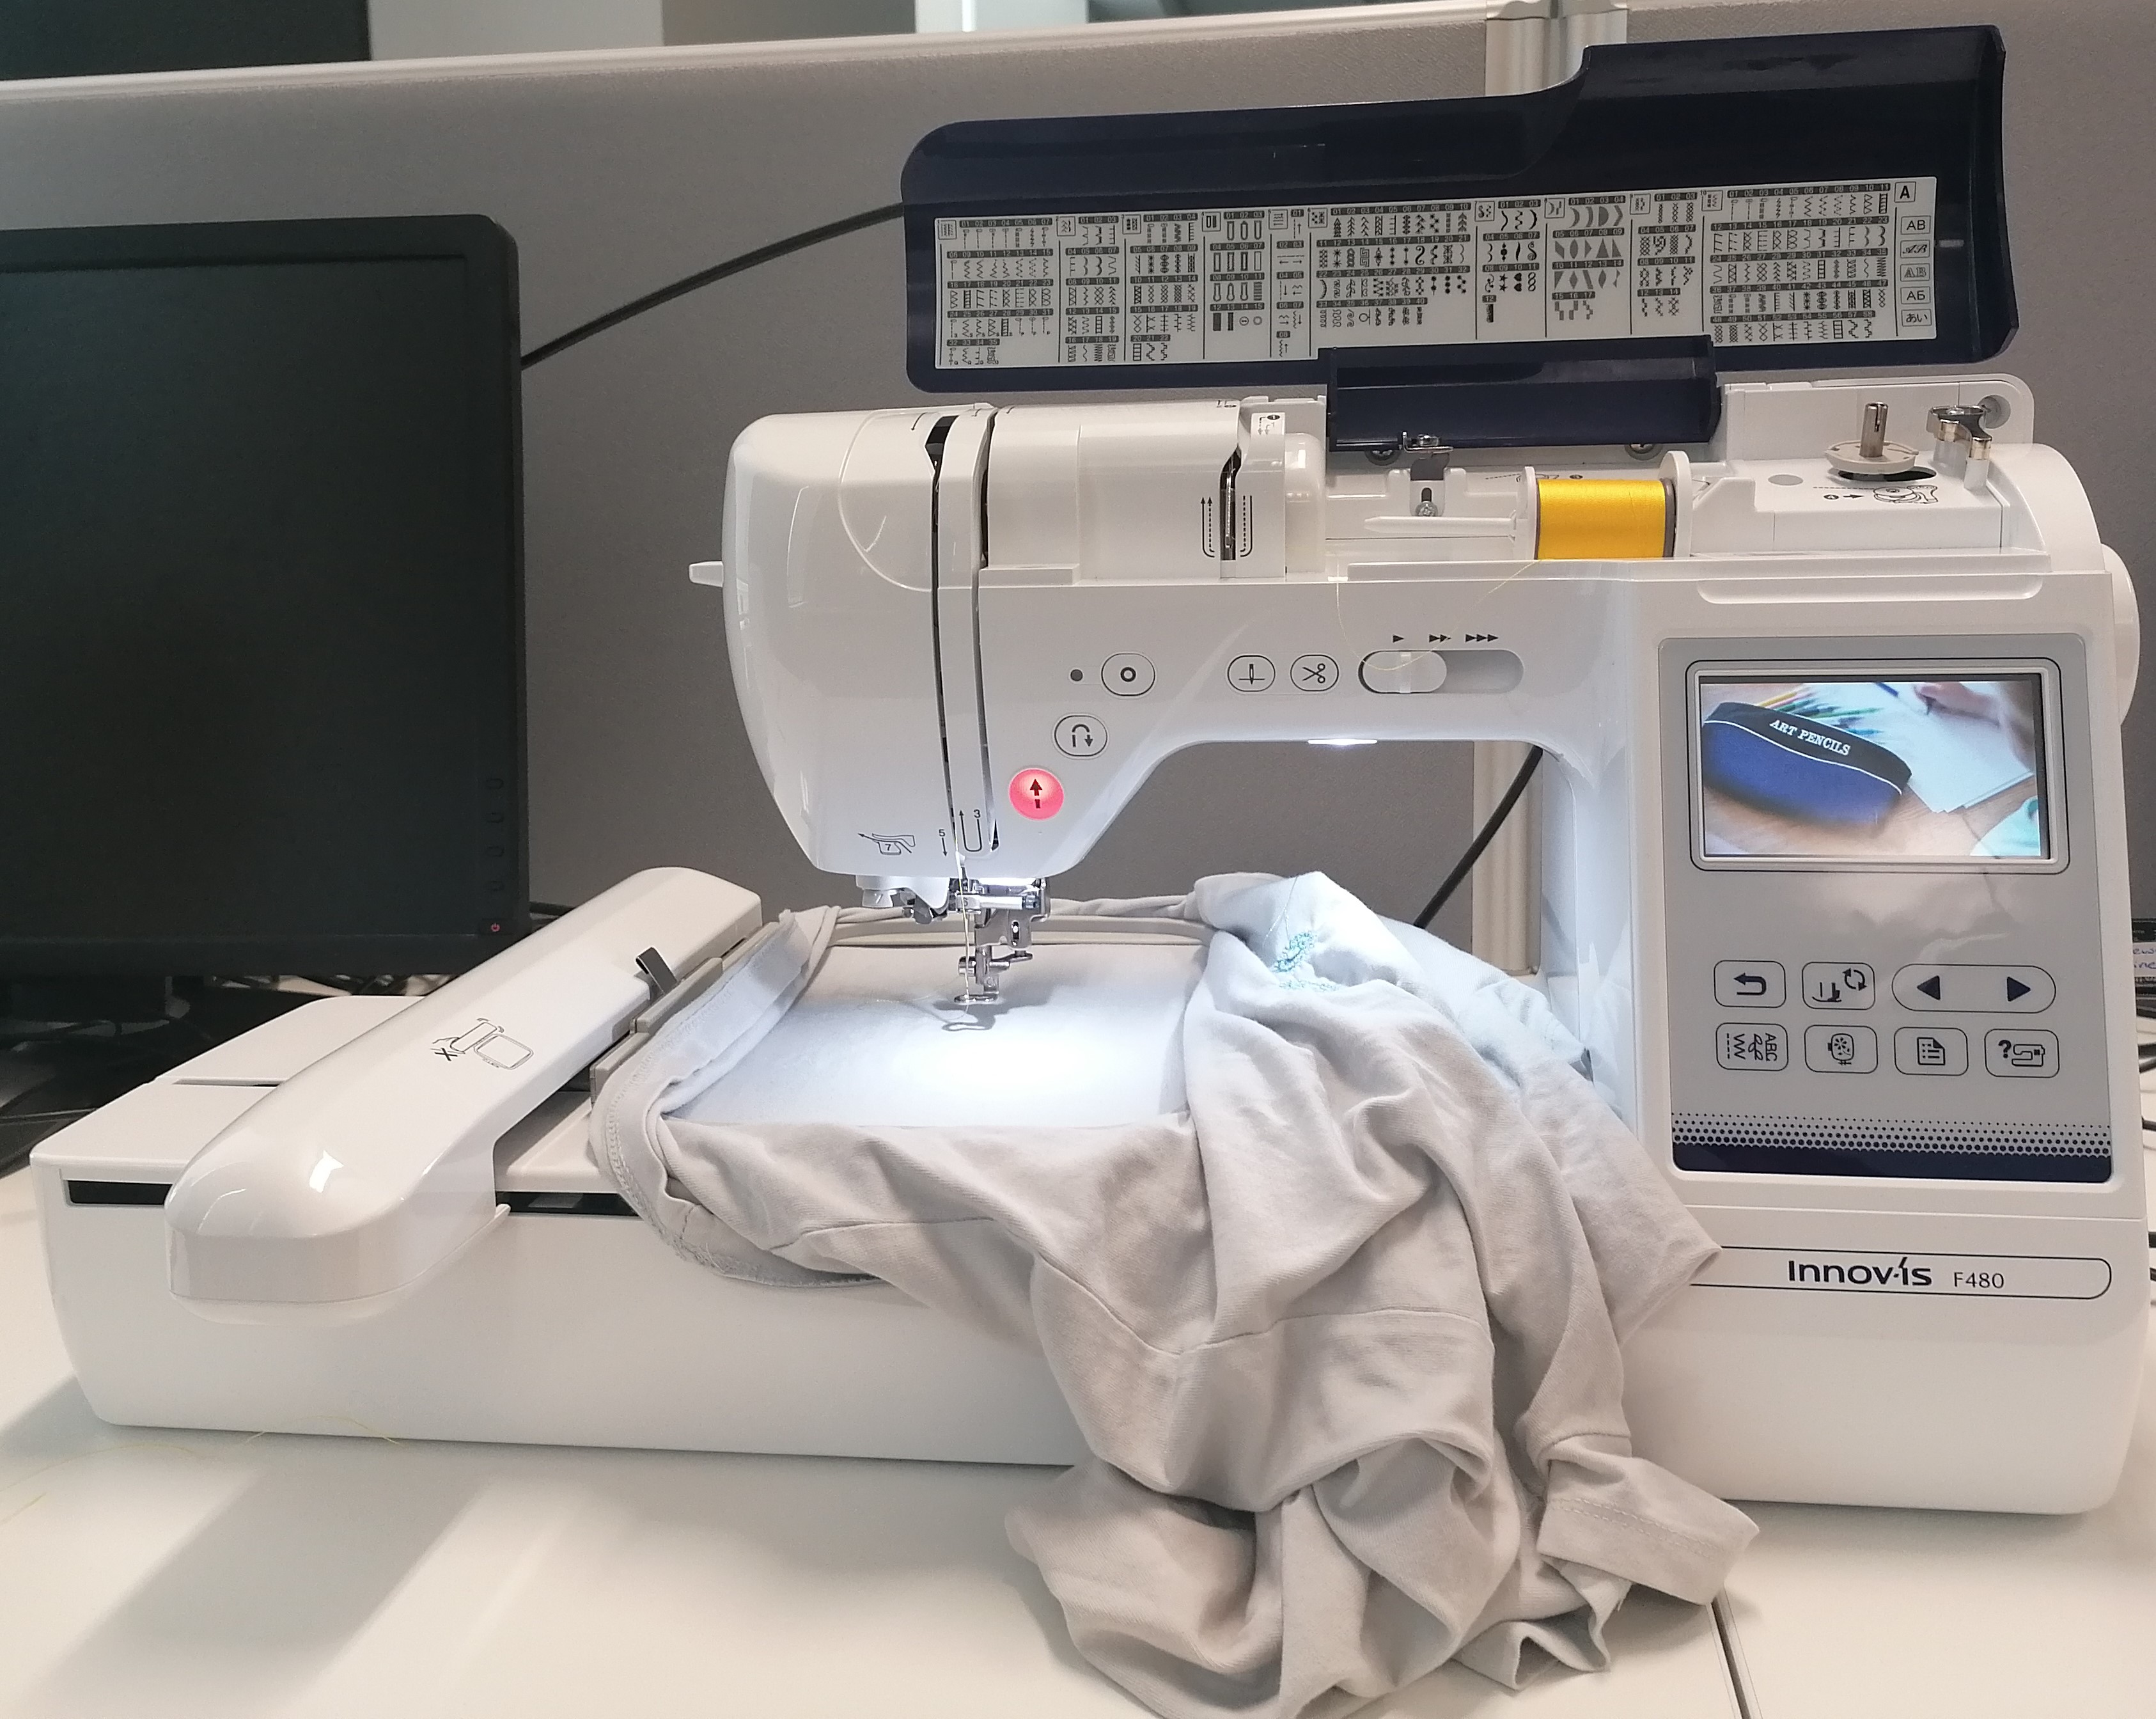 The Embroidery Machine